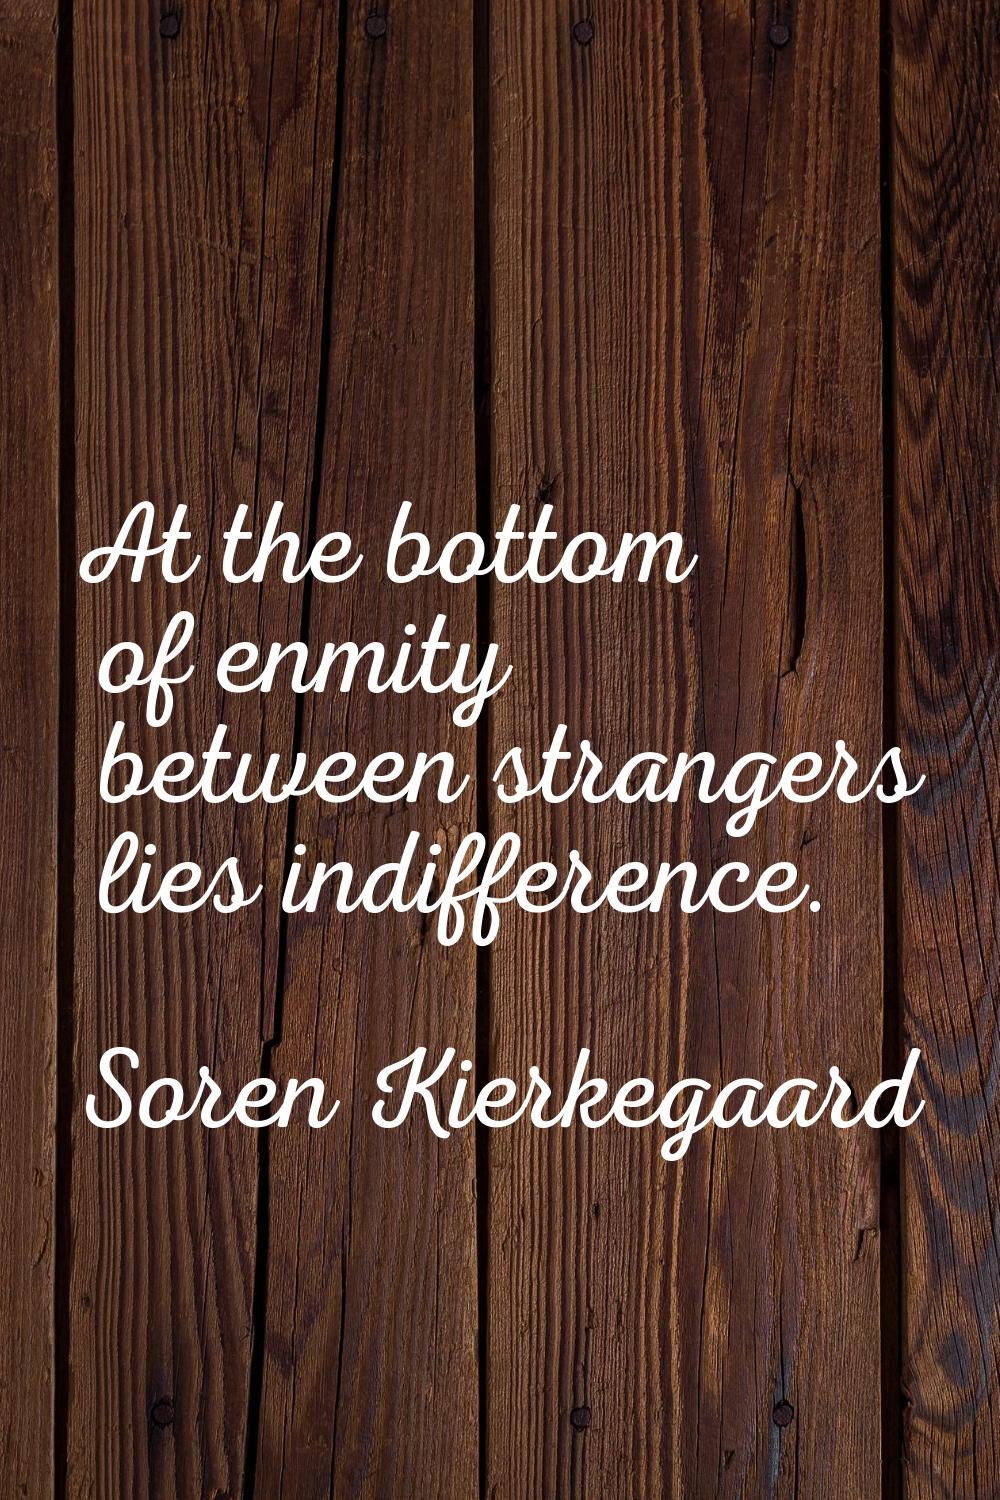 At the bottom of enmity between strangers lies indifference.